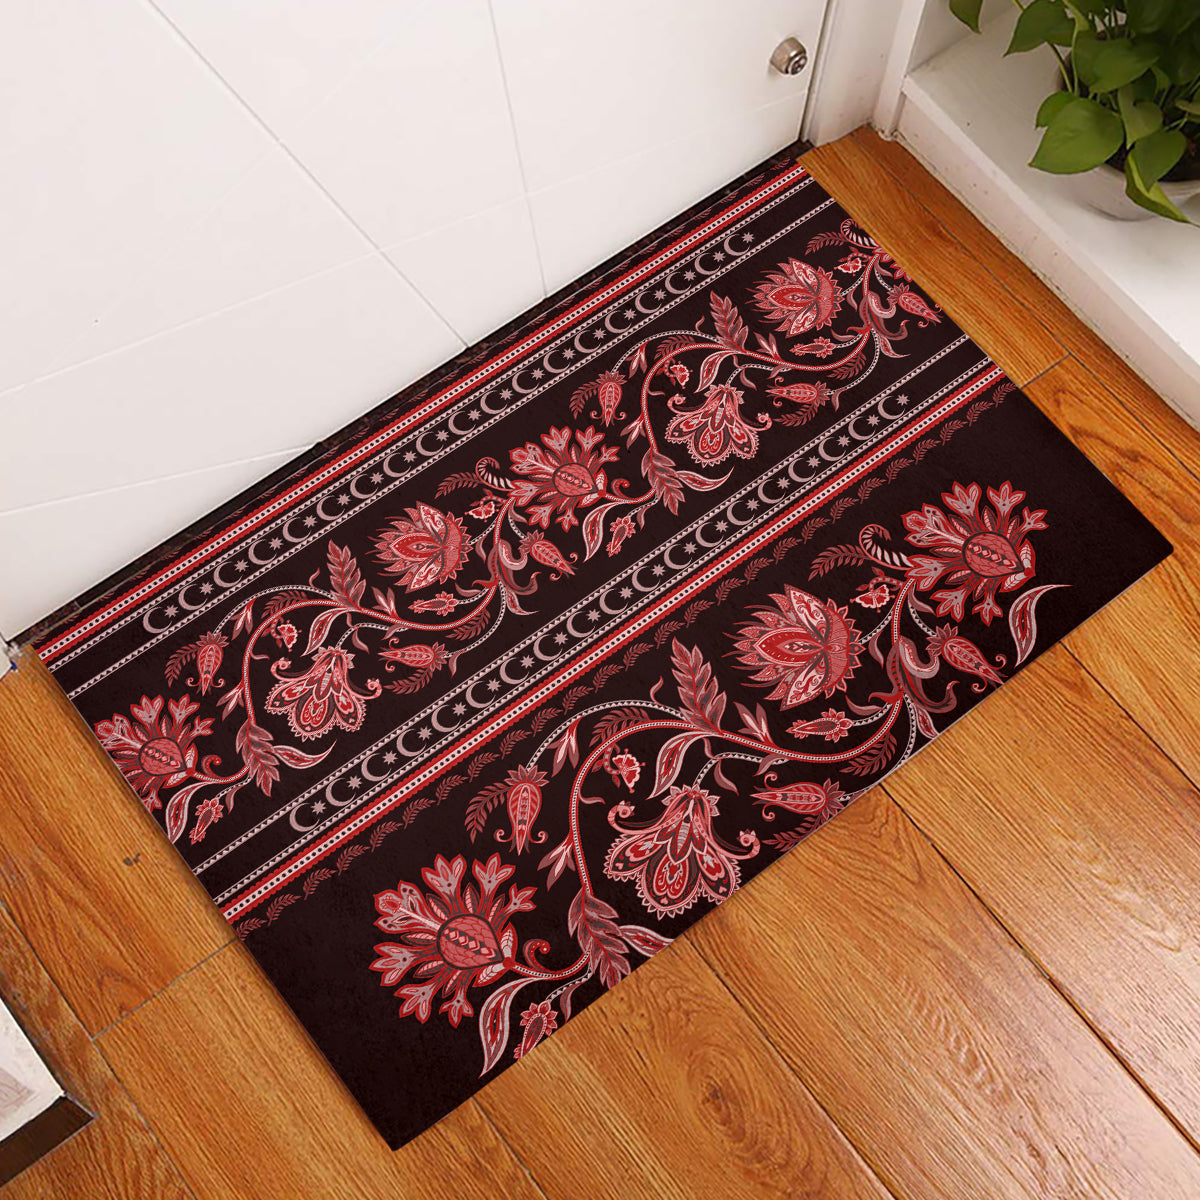 azerbaijan-rubber-doormat-traditional-pattern-ornament-with-flowers-buta-red